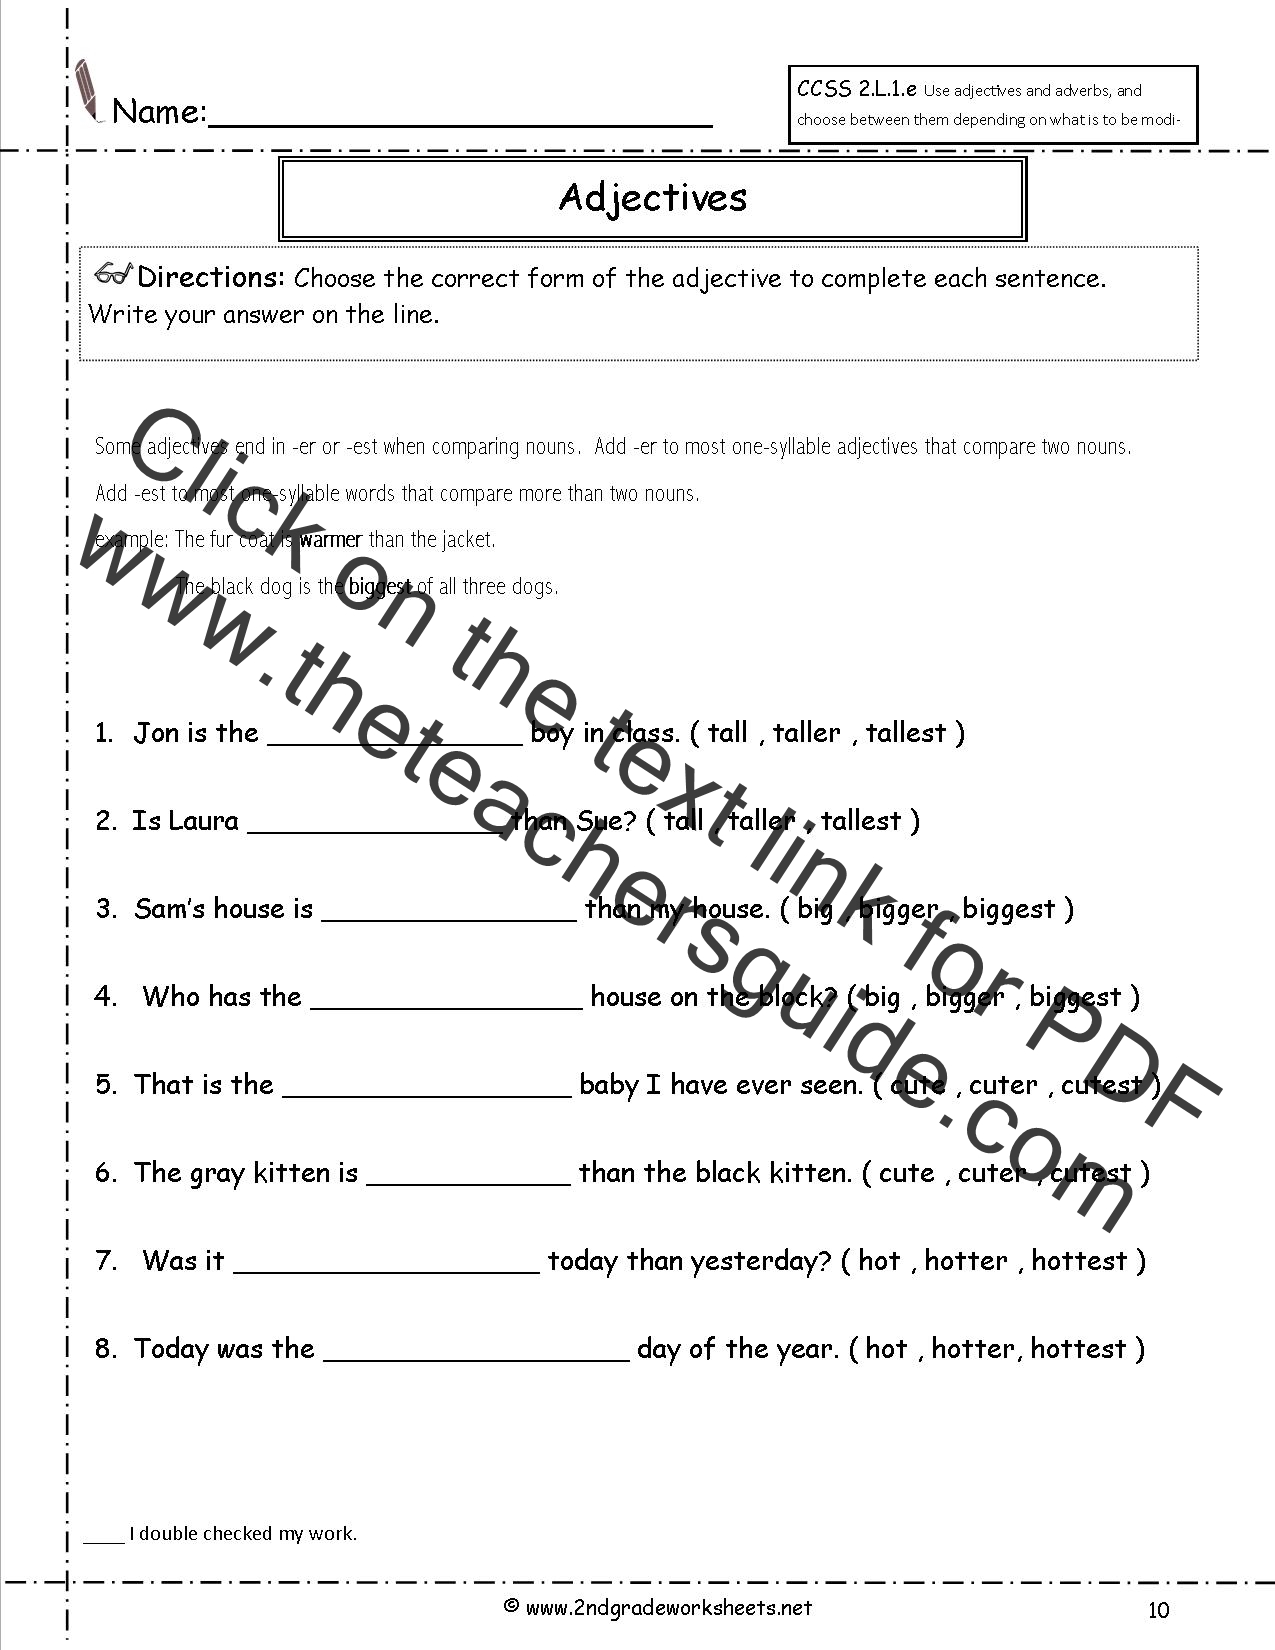 Free Using Adjectives And Adverbs Worksheets